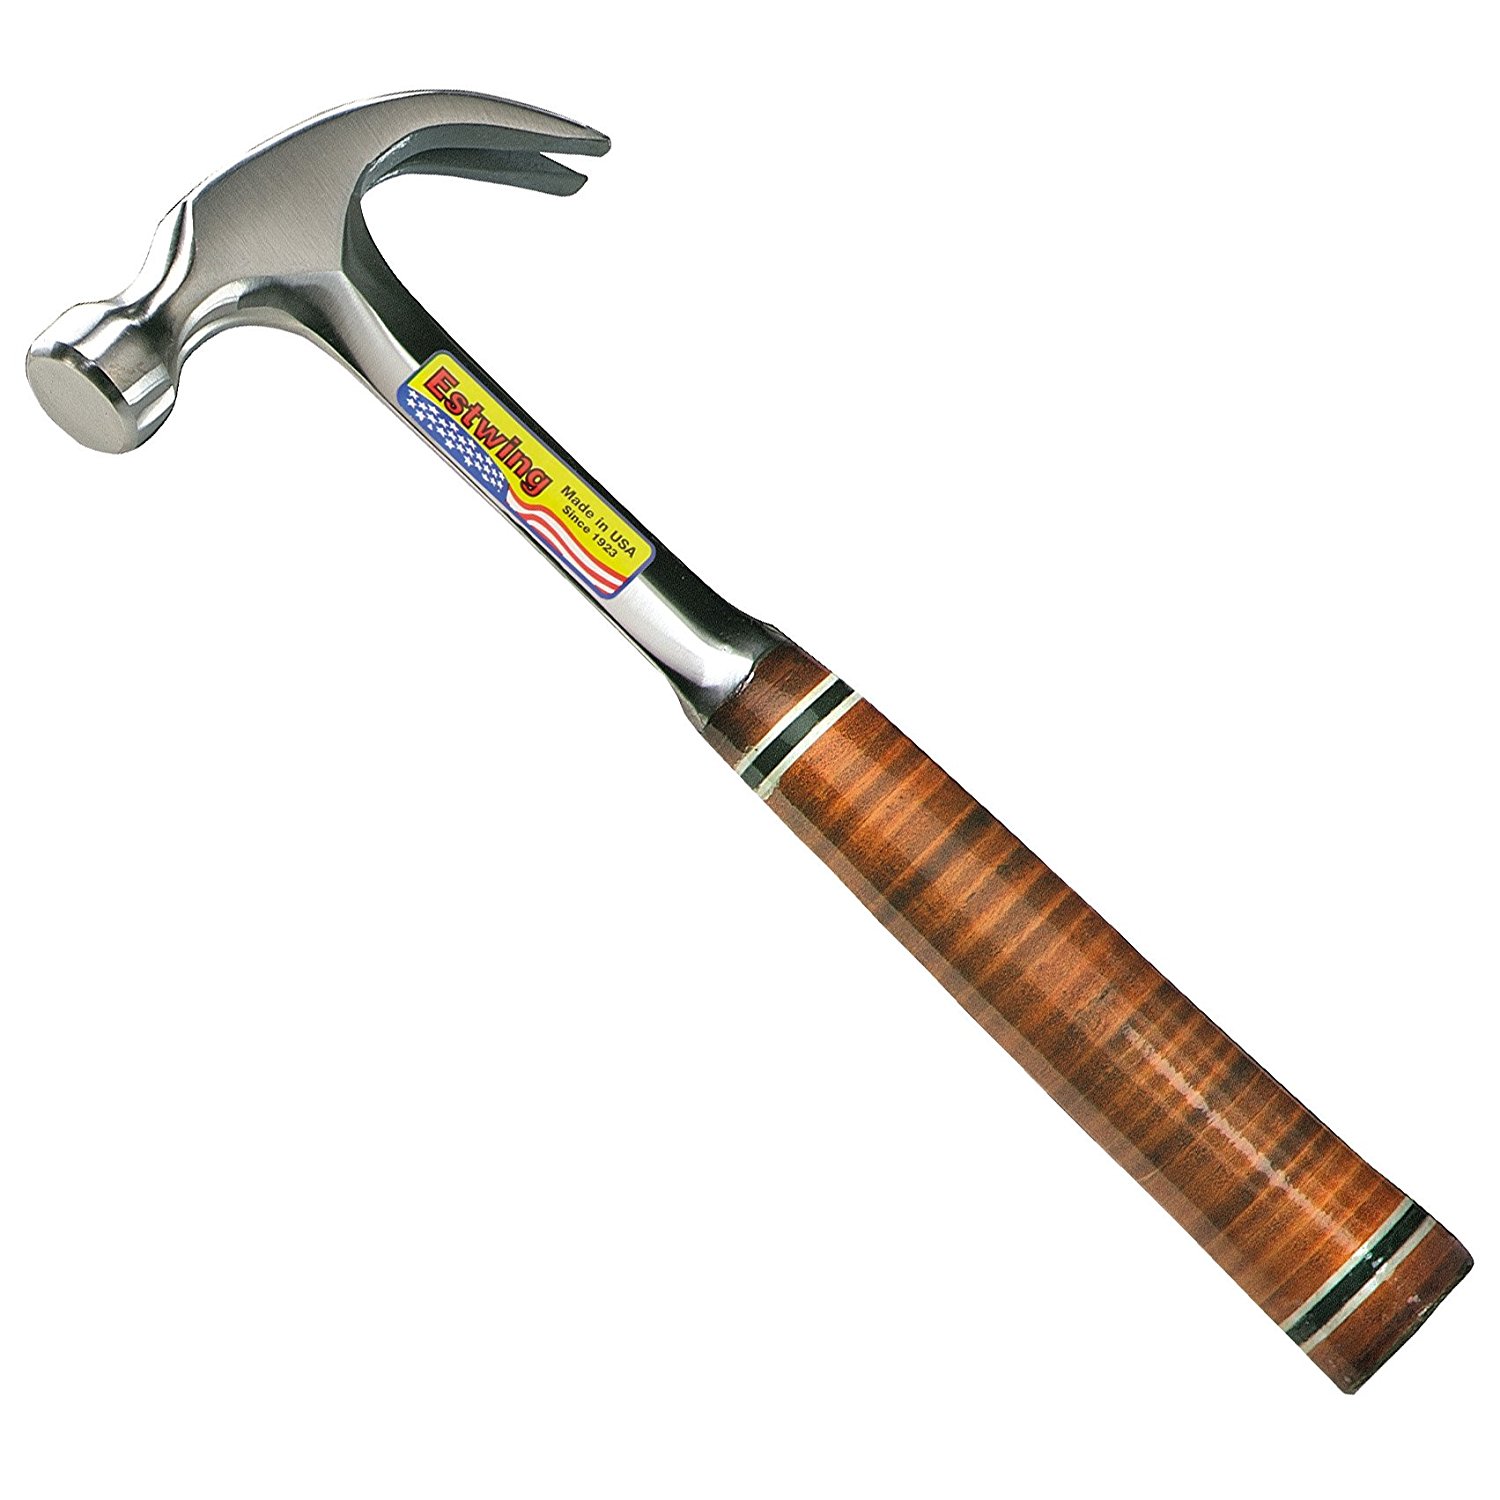 Estwing Hammer - 16 oz Curved Claw with Smooth Face & Genuine ...